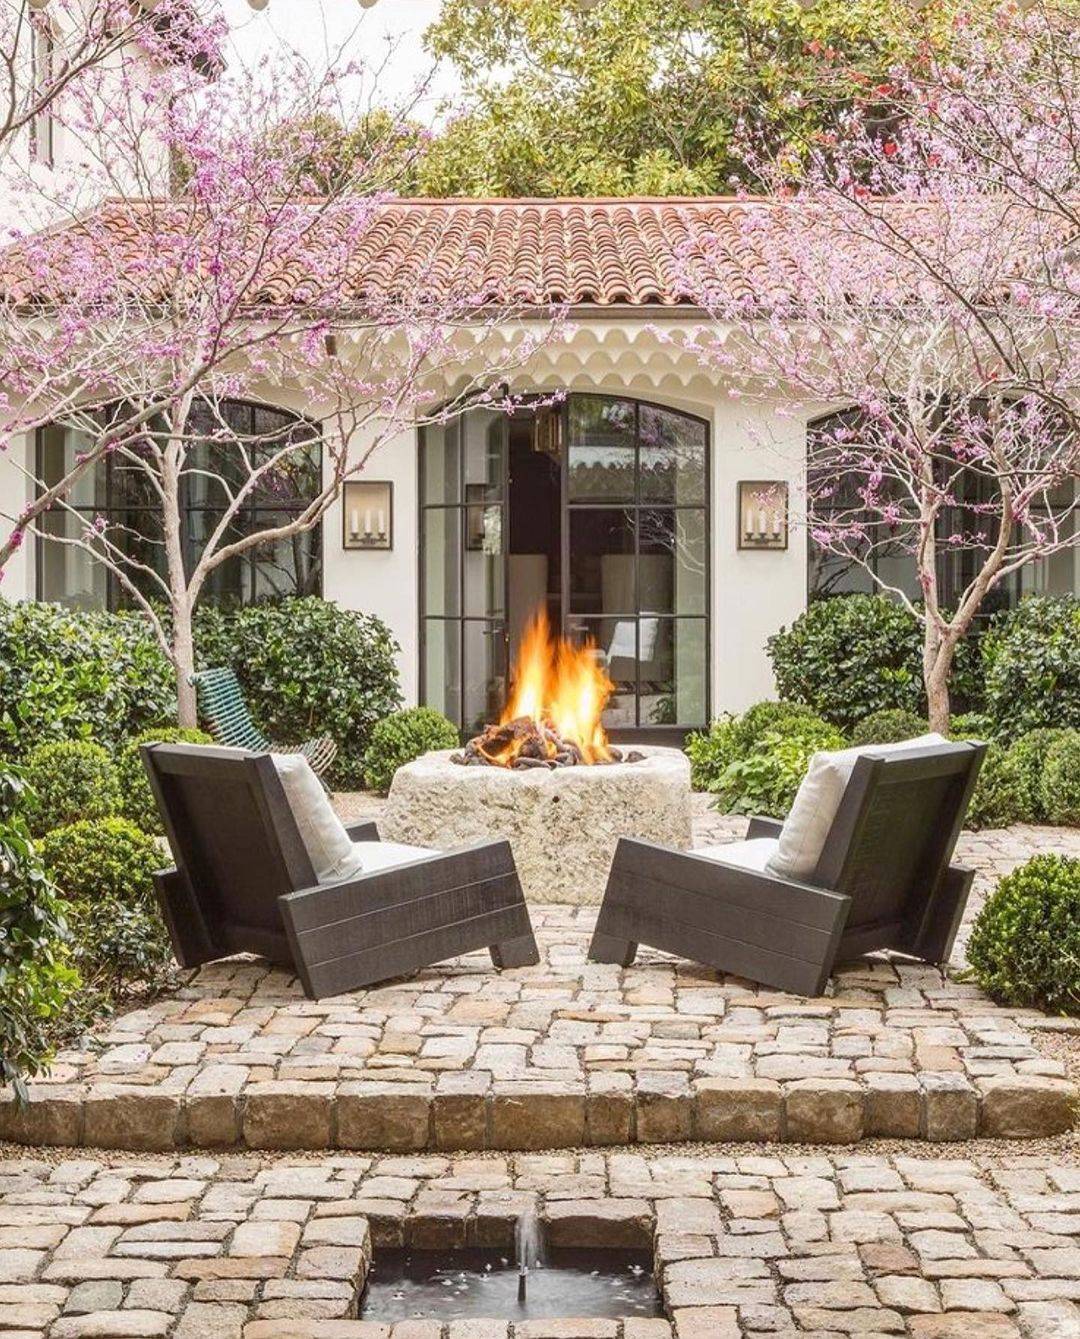 Backyard with fire pit and trees